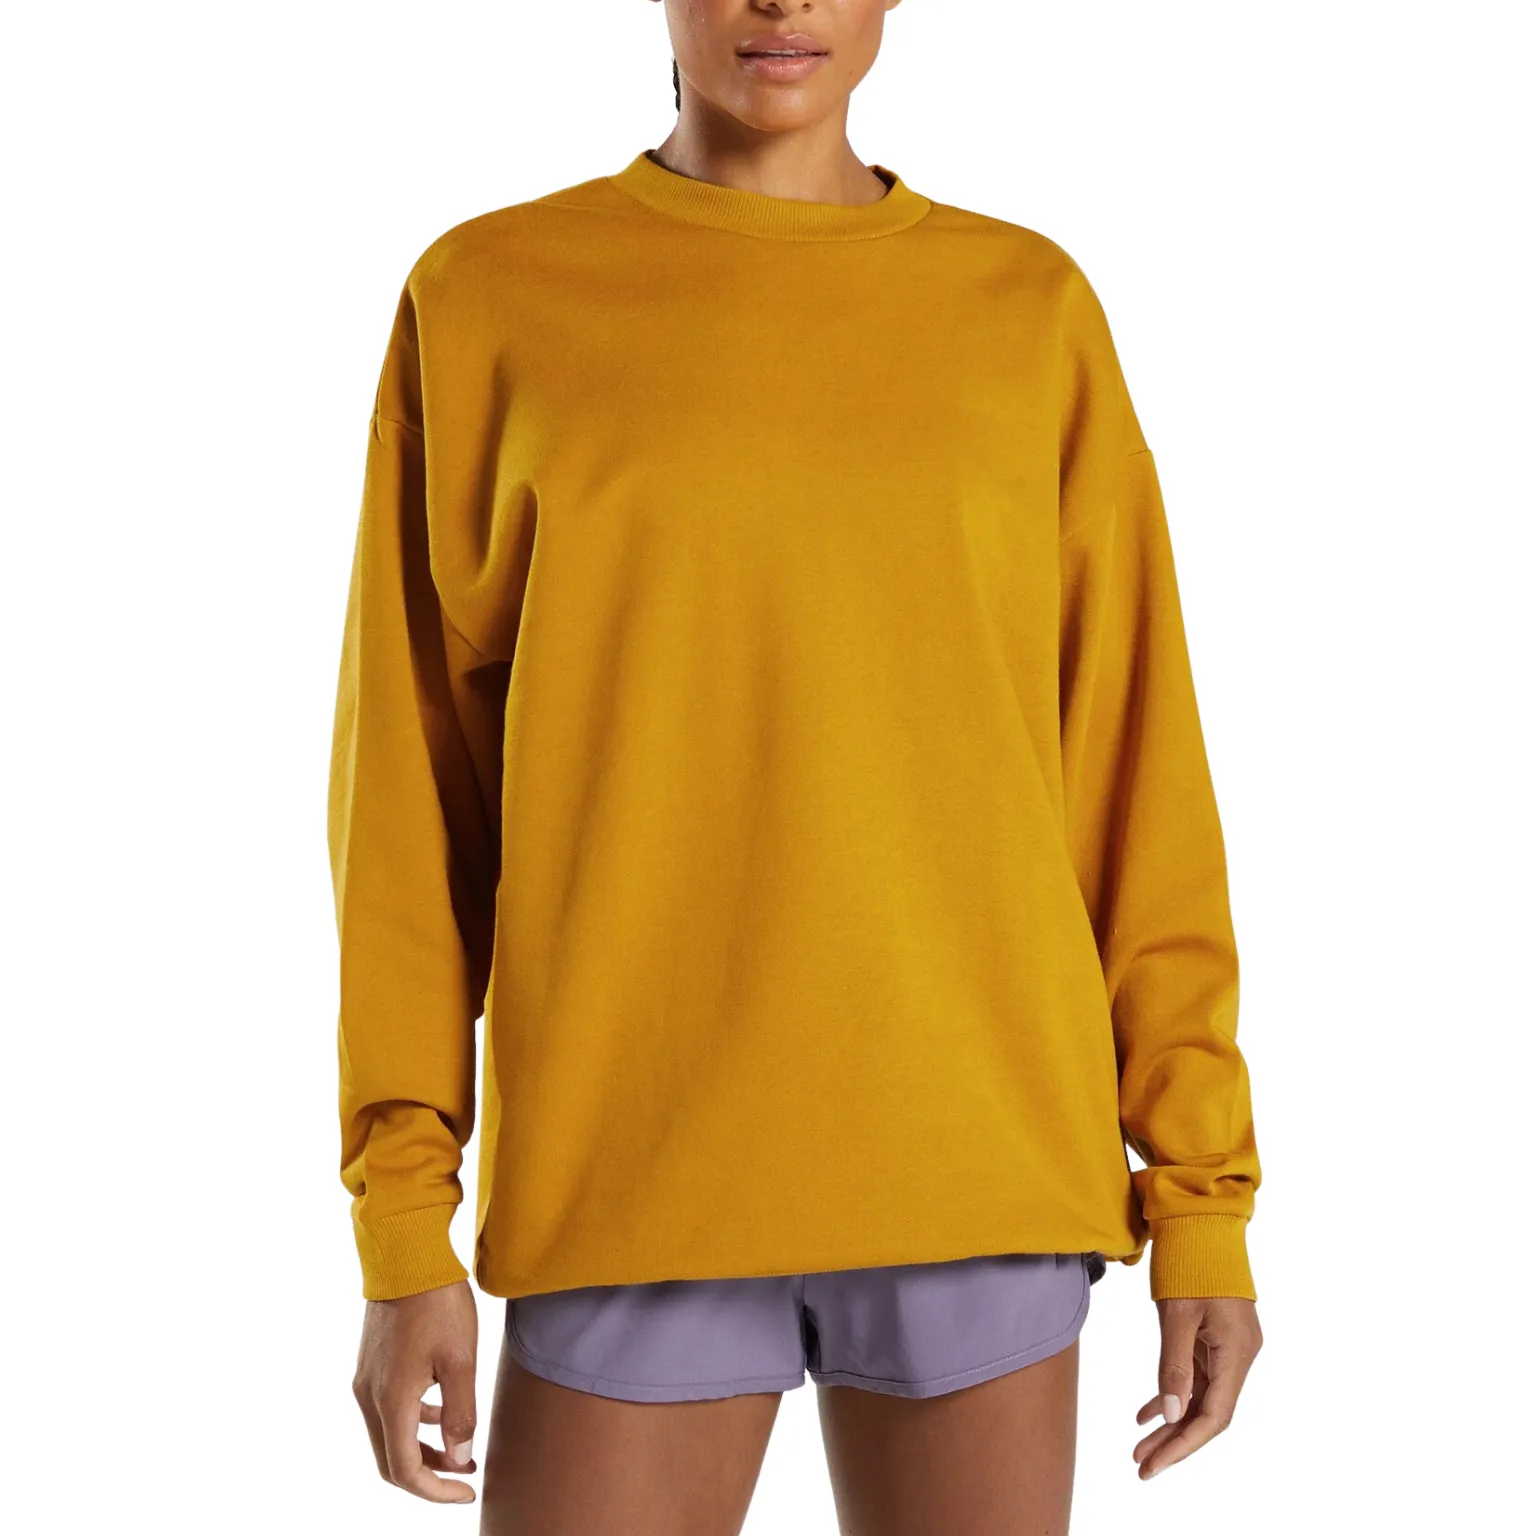 Pullover Sweatshirts manufacturing with trendy design